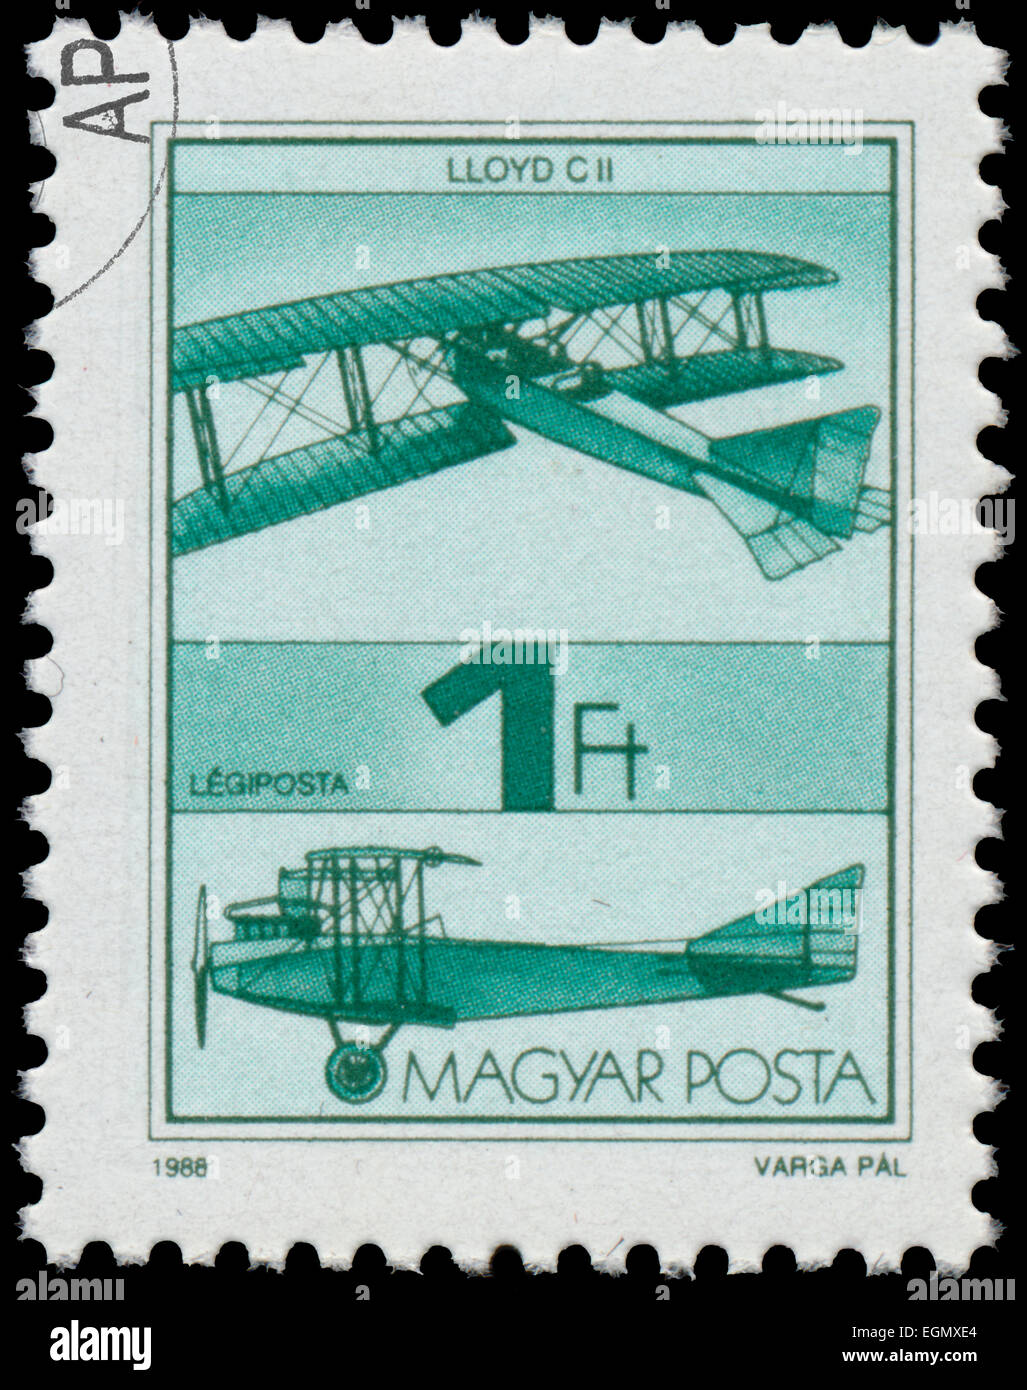 HUNGARY - CIRCA 1988 : A stamp printed in Hungary shows Old Airplane, with the inscription 'Lloyd CII', from the series Airplane Stock Photo